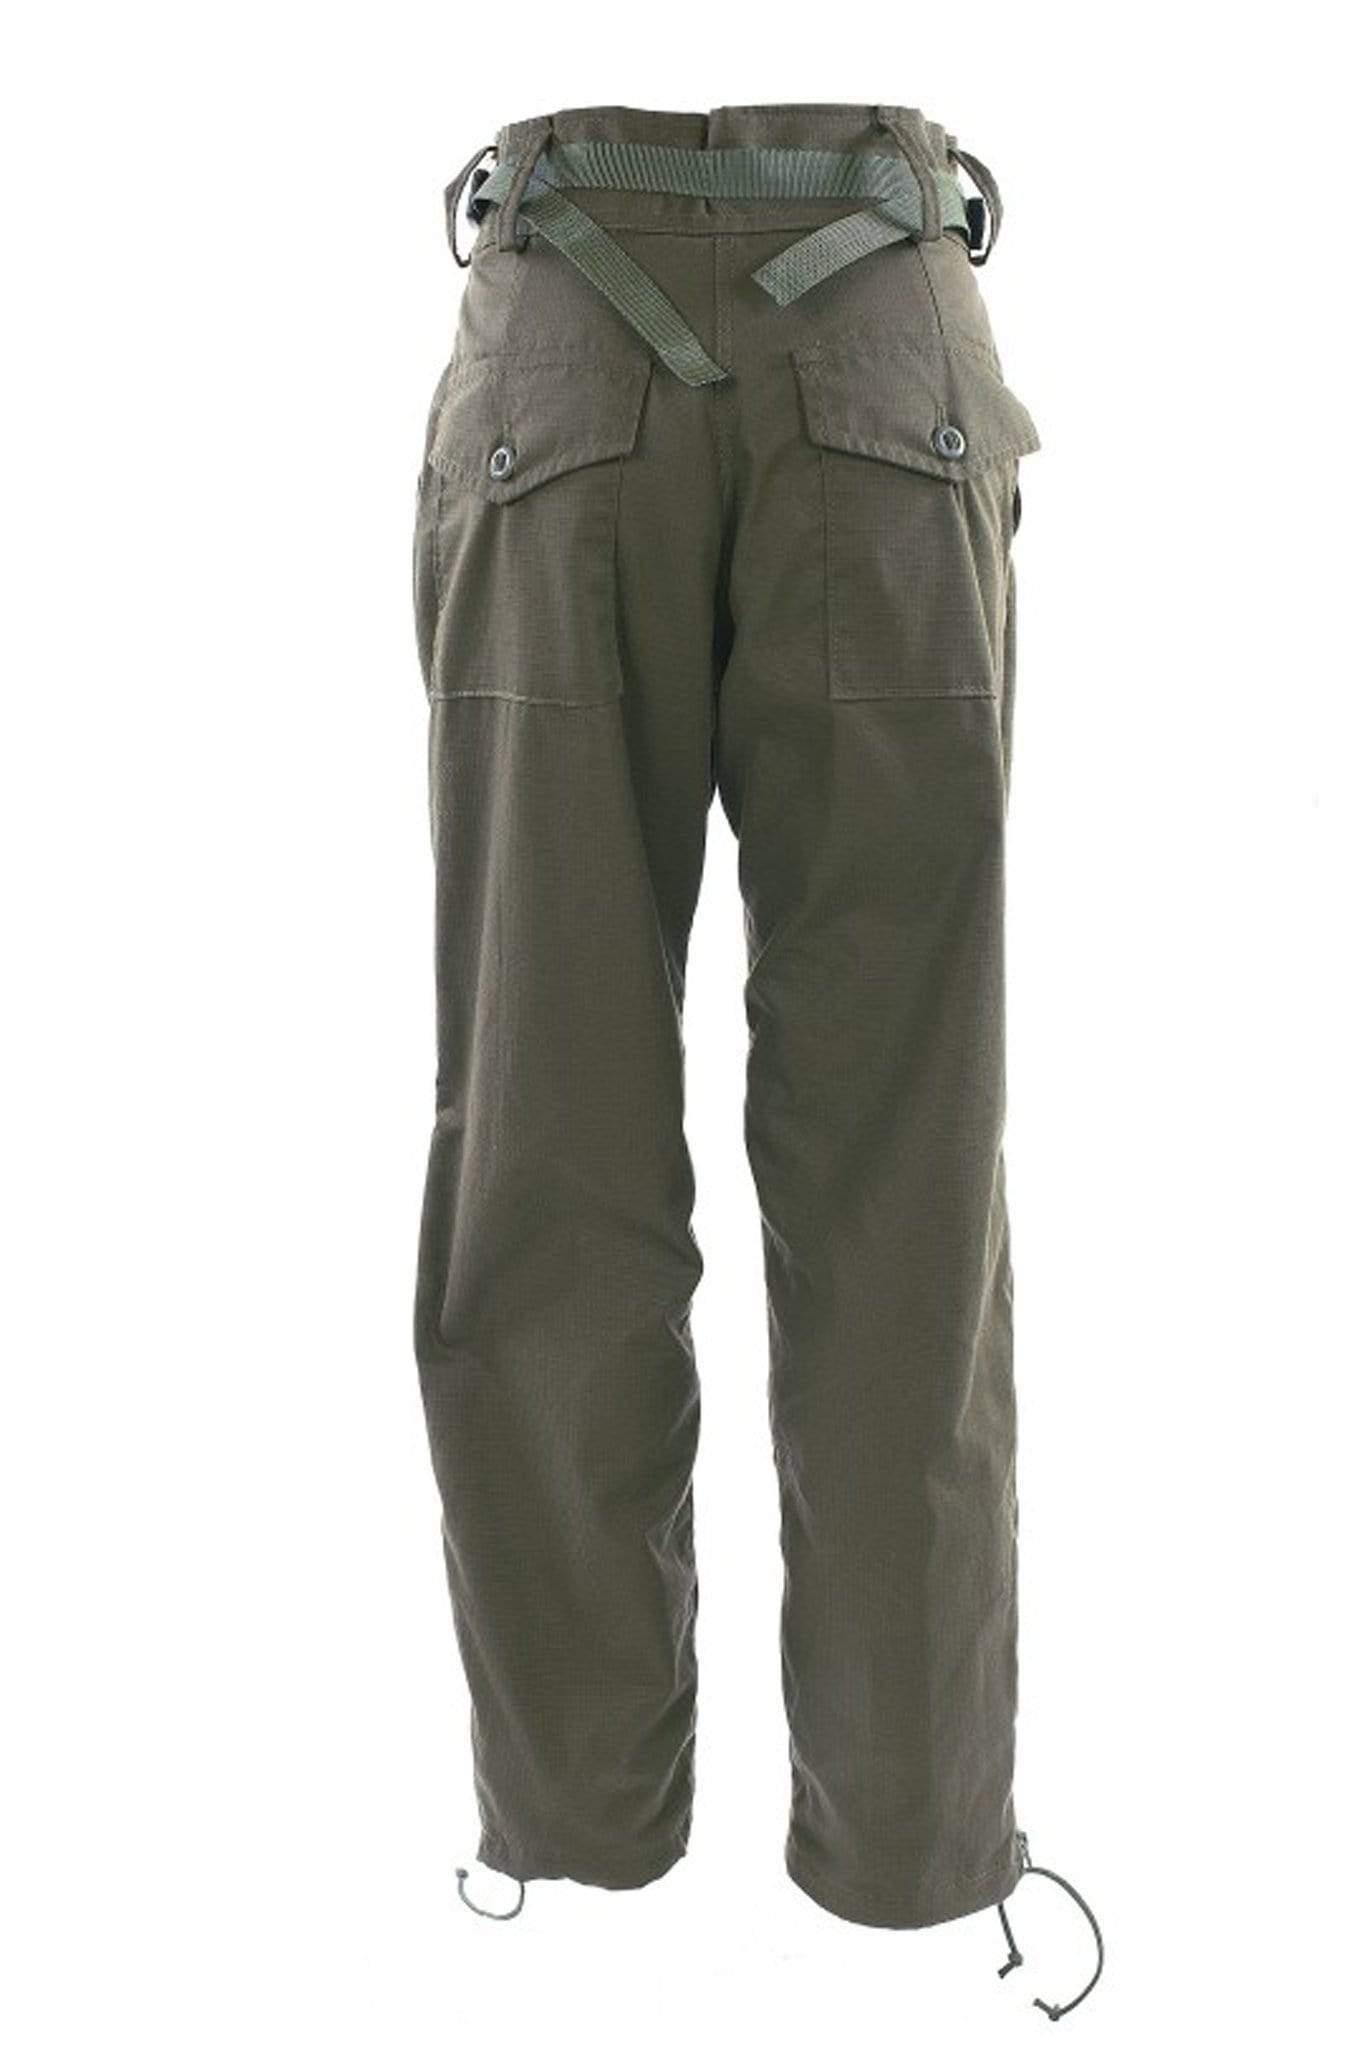 Fortis Trousers Fortis Ladies Falkland Waterproof Over Trousers